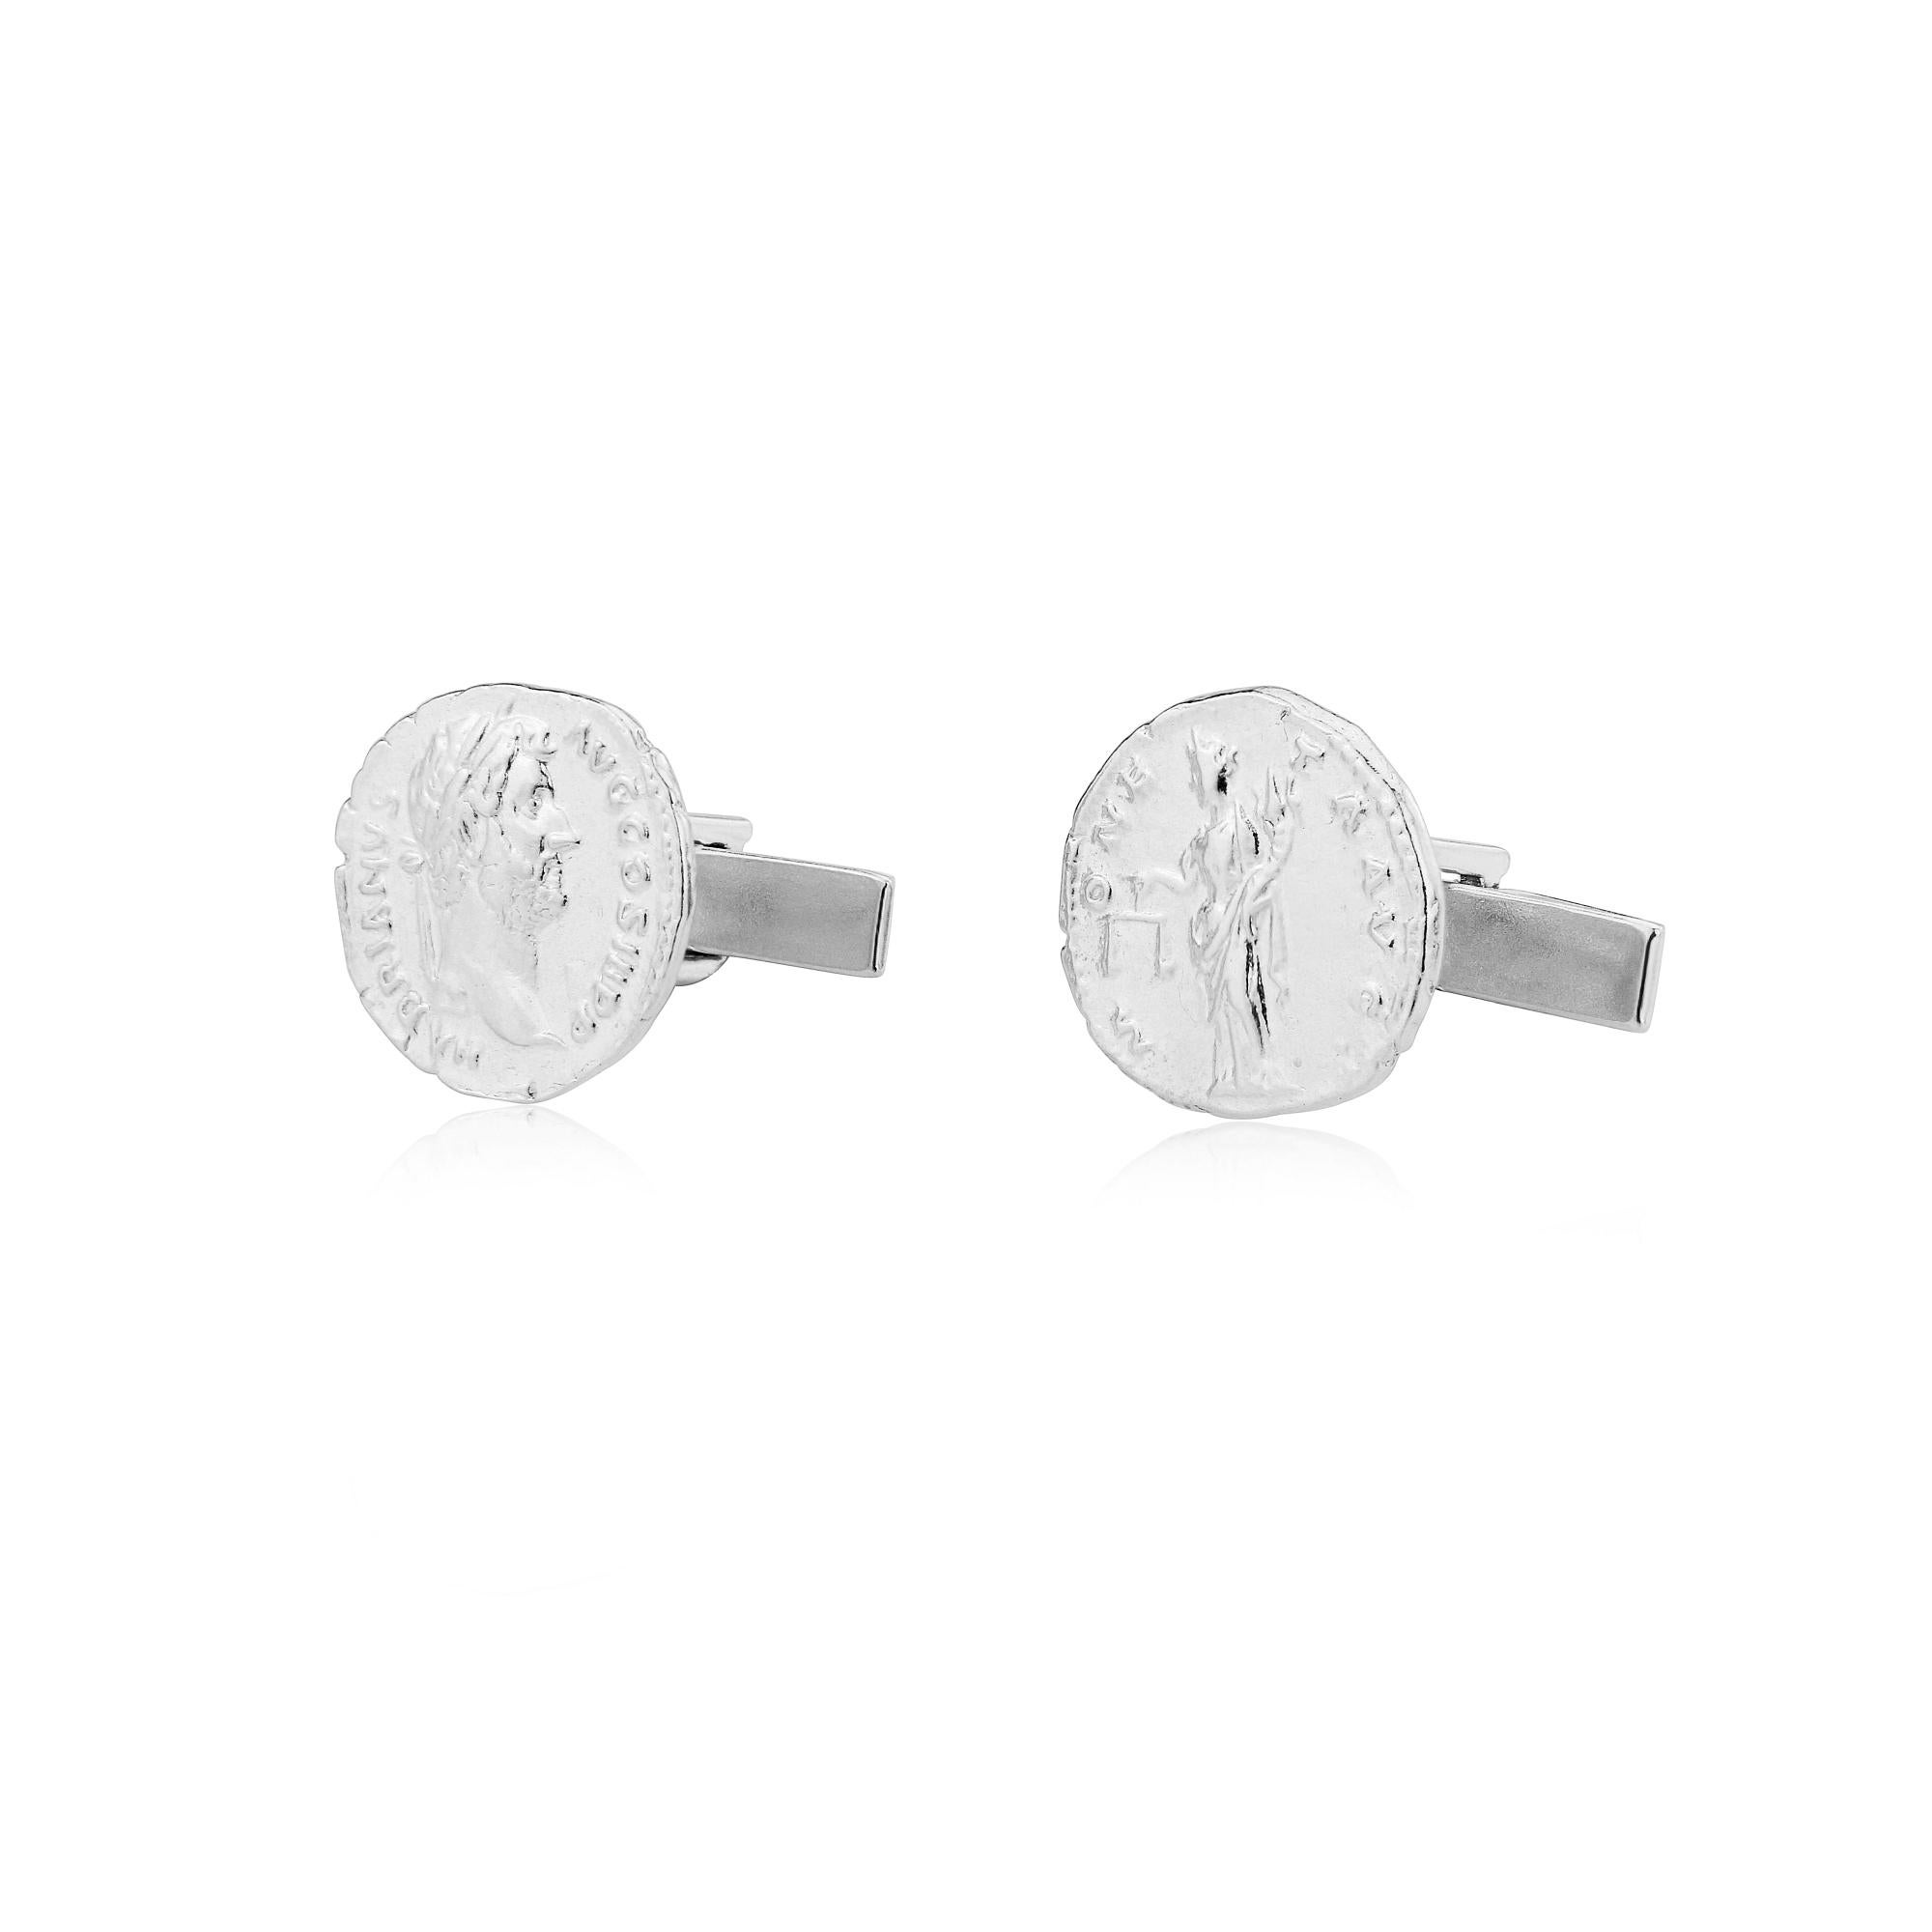 Simon Kemp, a third generation English Jeweller, has made a mould of the original coin of the Emperor Hadrian. This has been used to cast a silver cufflink which is highly detailed and tactile.
The pair of cufflinks show both sides of the coin and